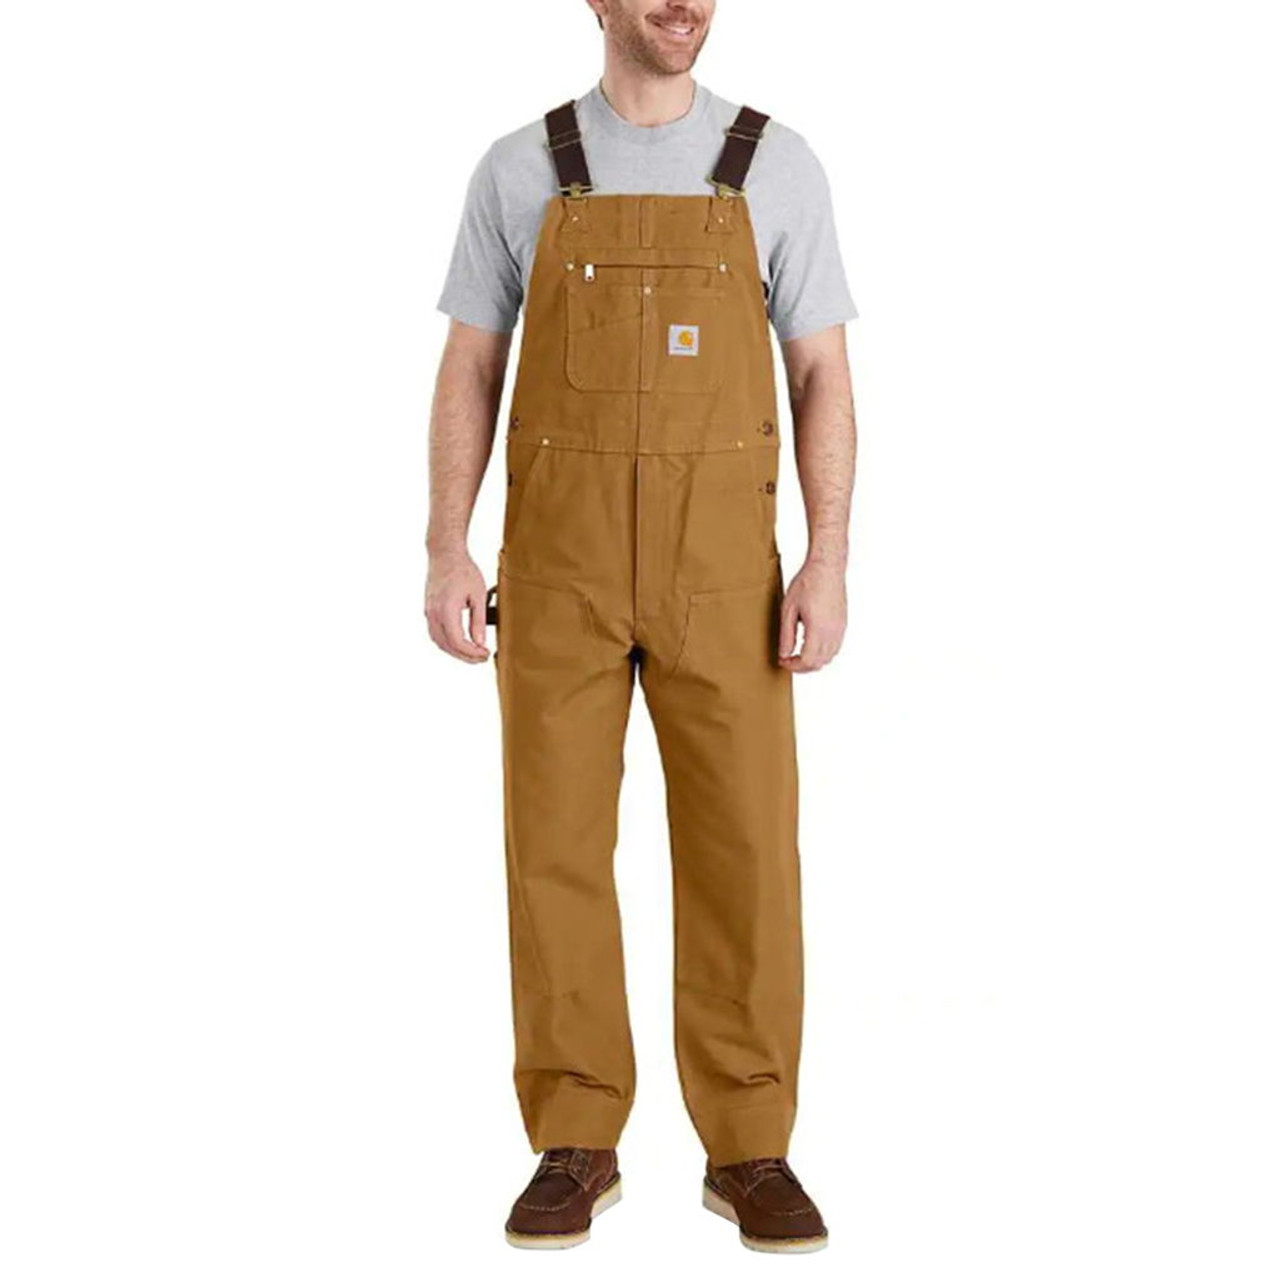 Men's Fire Hose Ultimate Relaxed Fit Bib Overalls